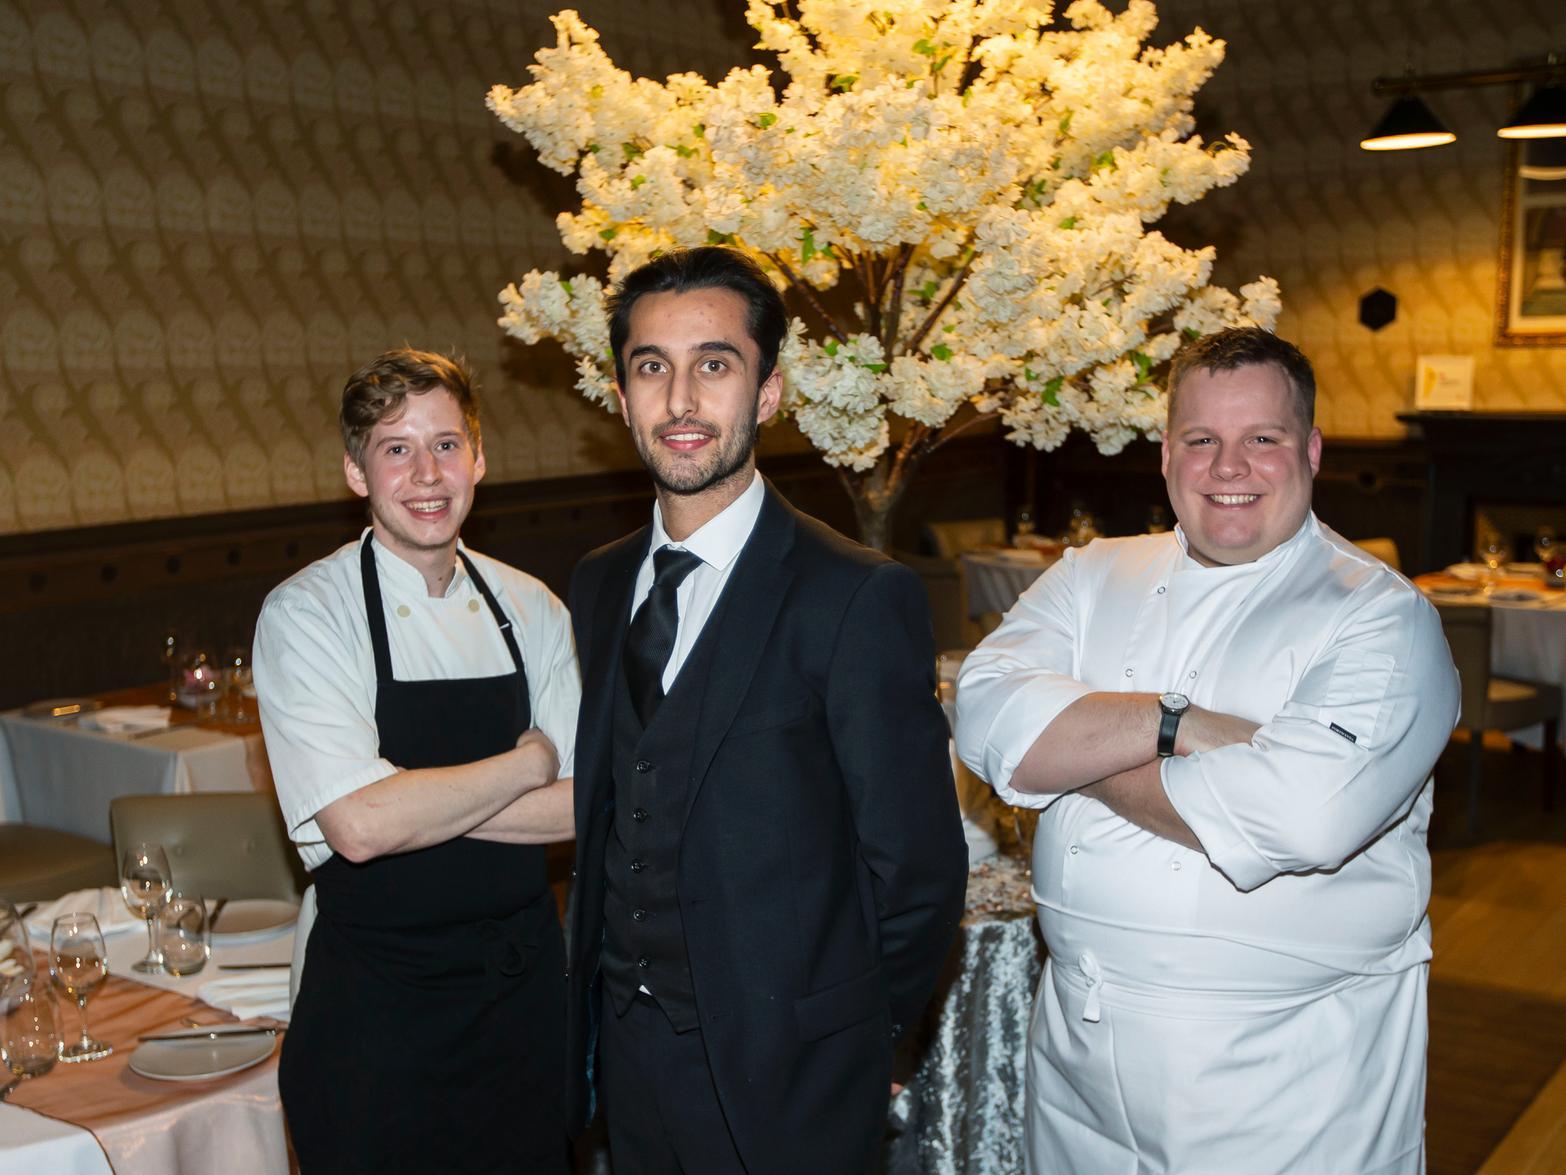 Pictured left to right: Sous chef Arthur Dzerins, restaurant manager Kieran McNamara and executive chef Sam Squires.